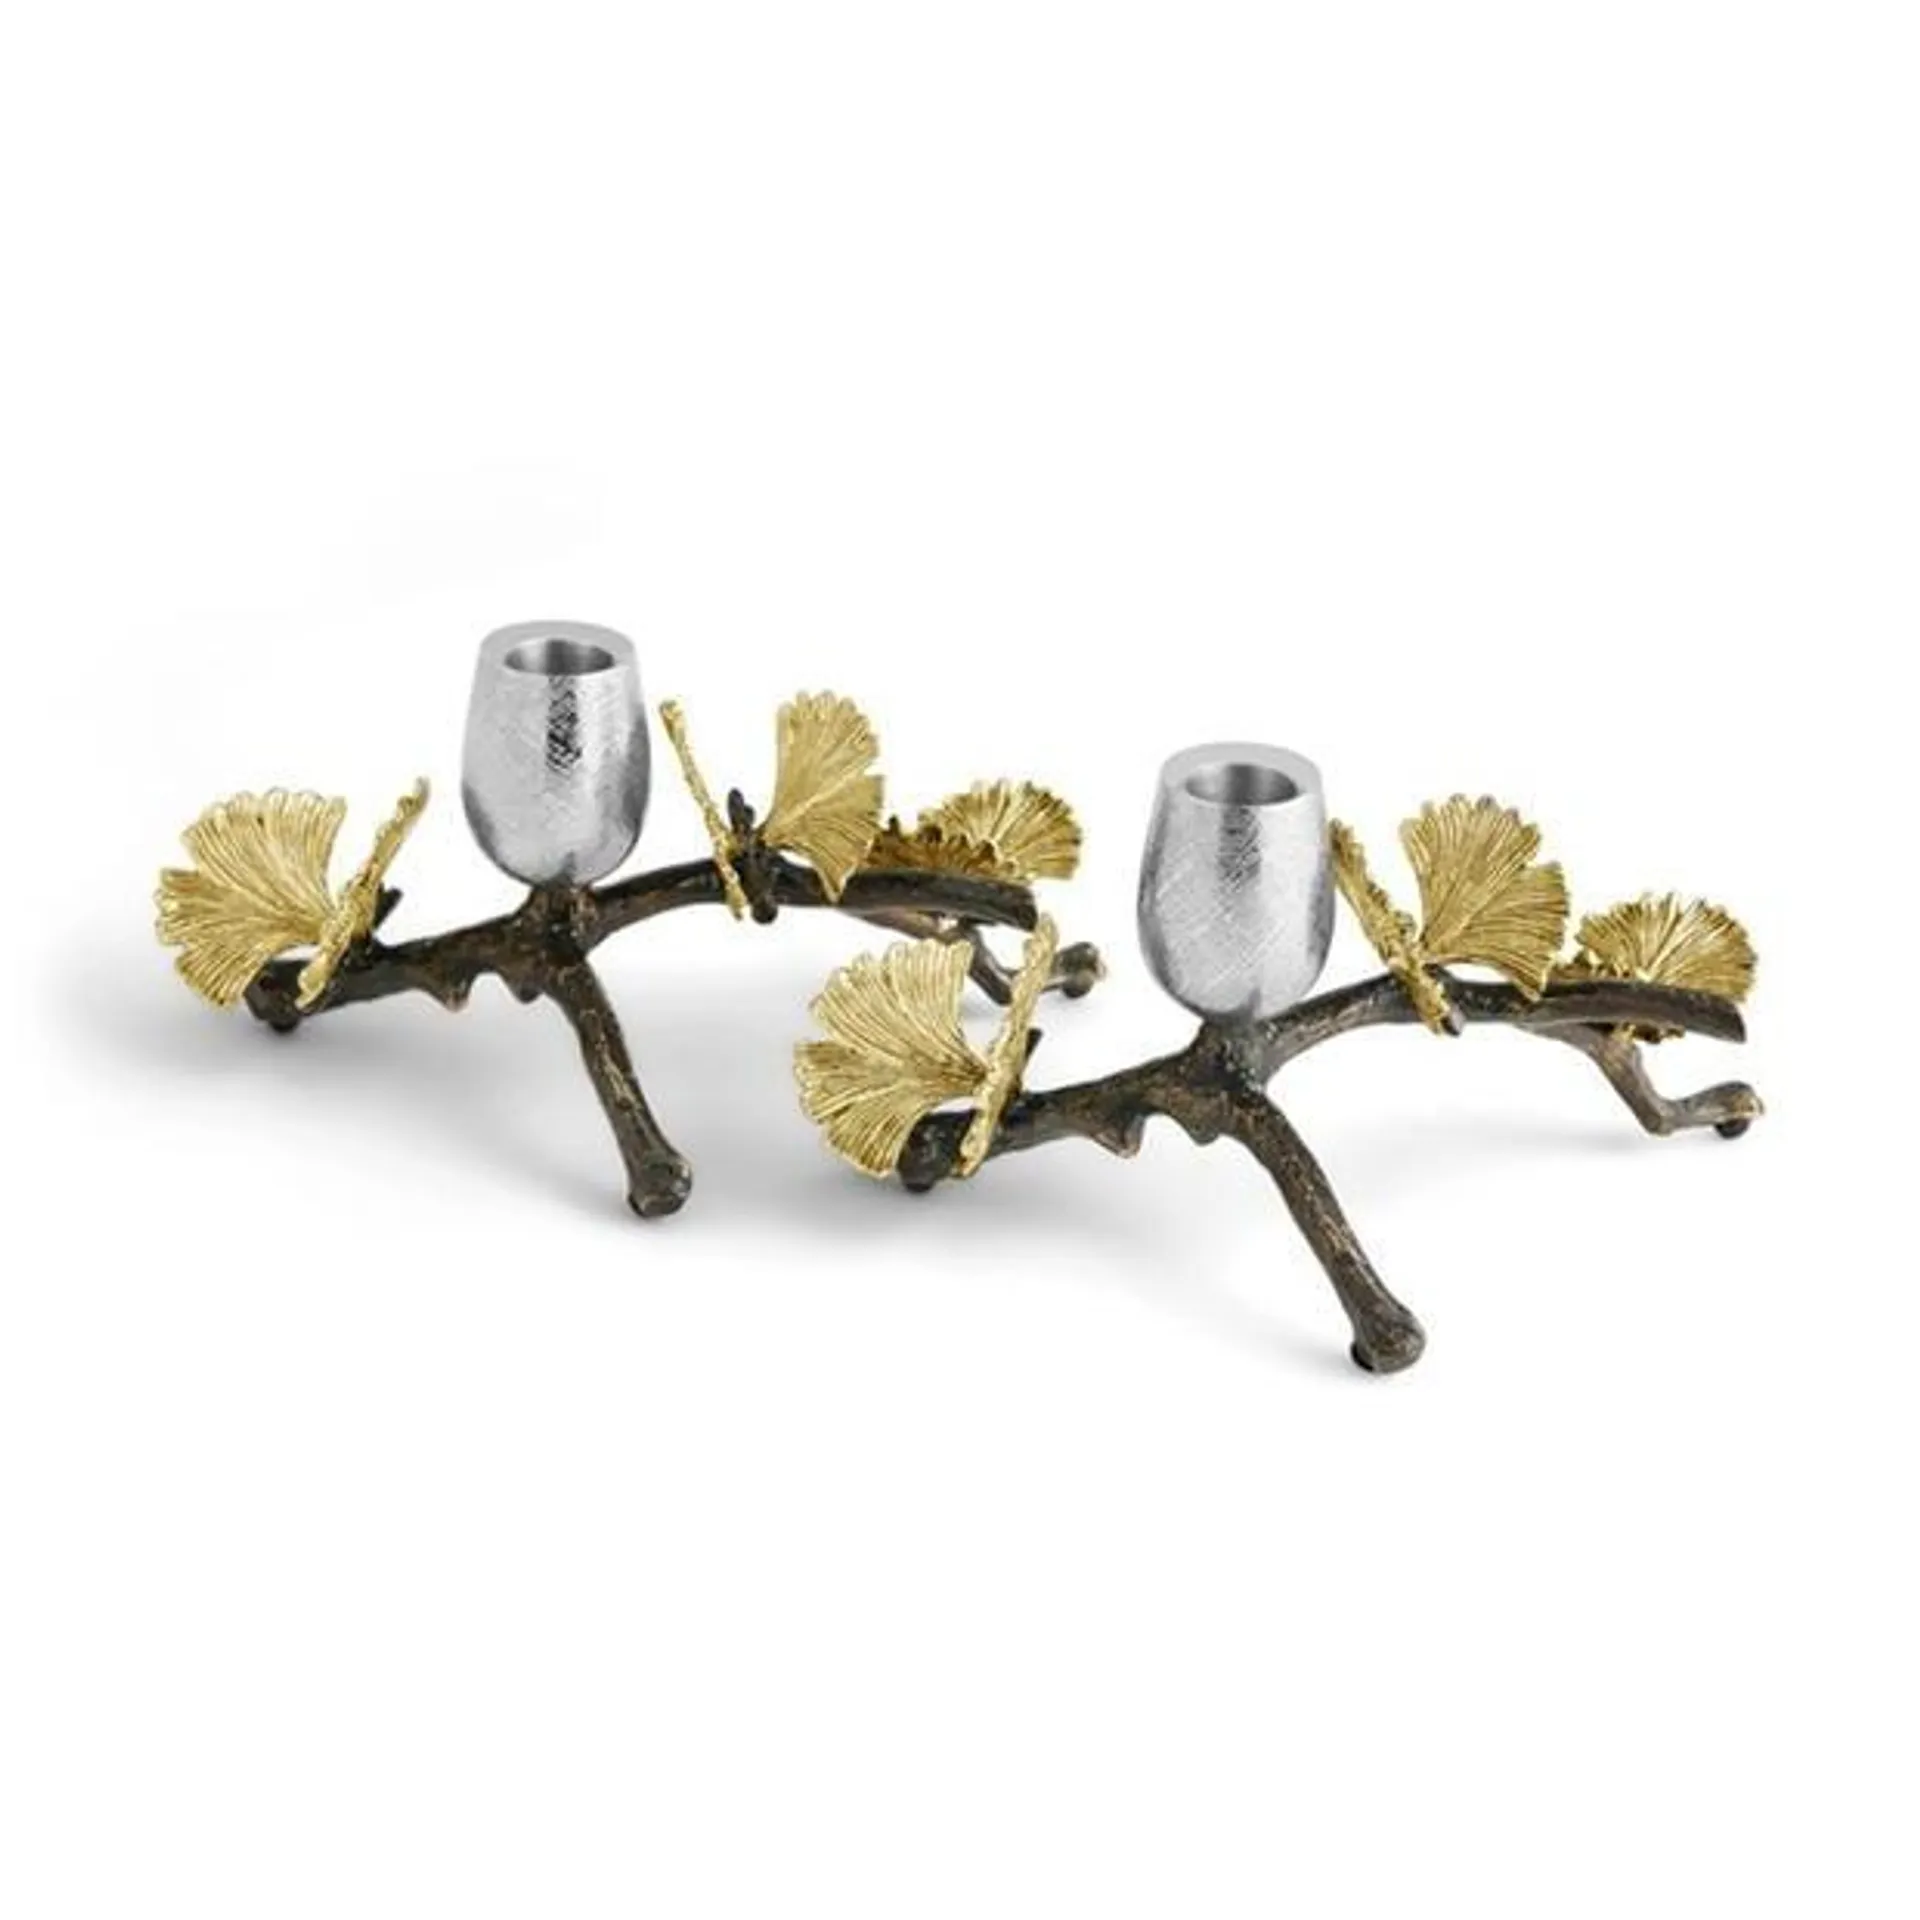 Michael Aram Butterfly Ginkgo Candle Holders